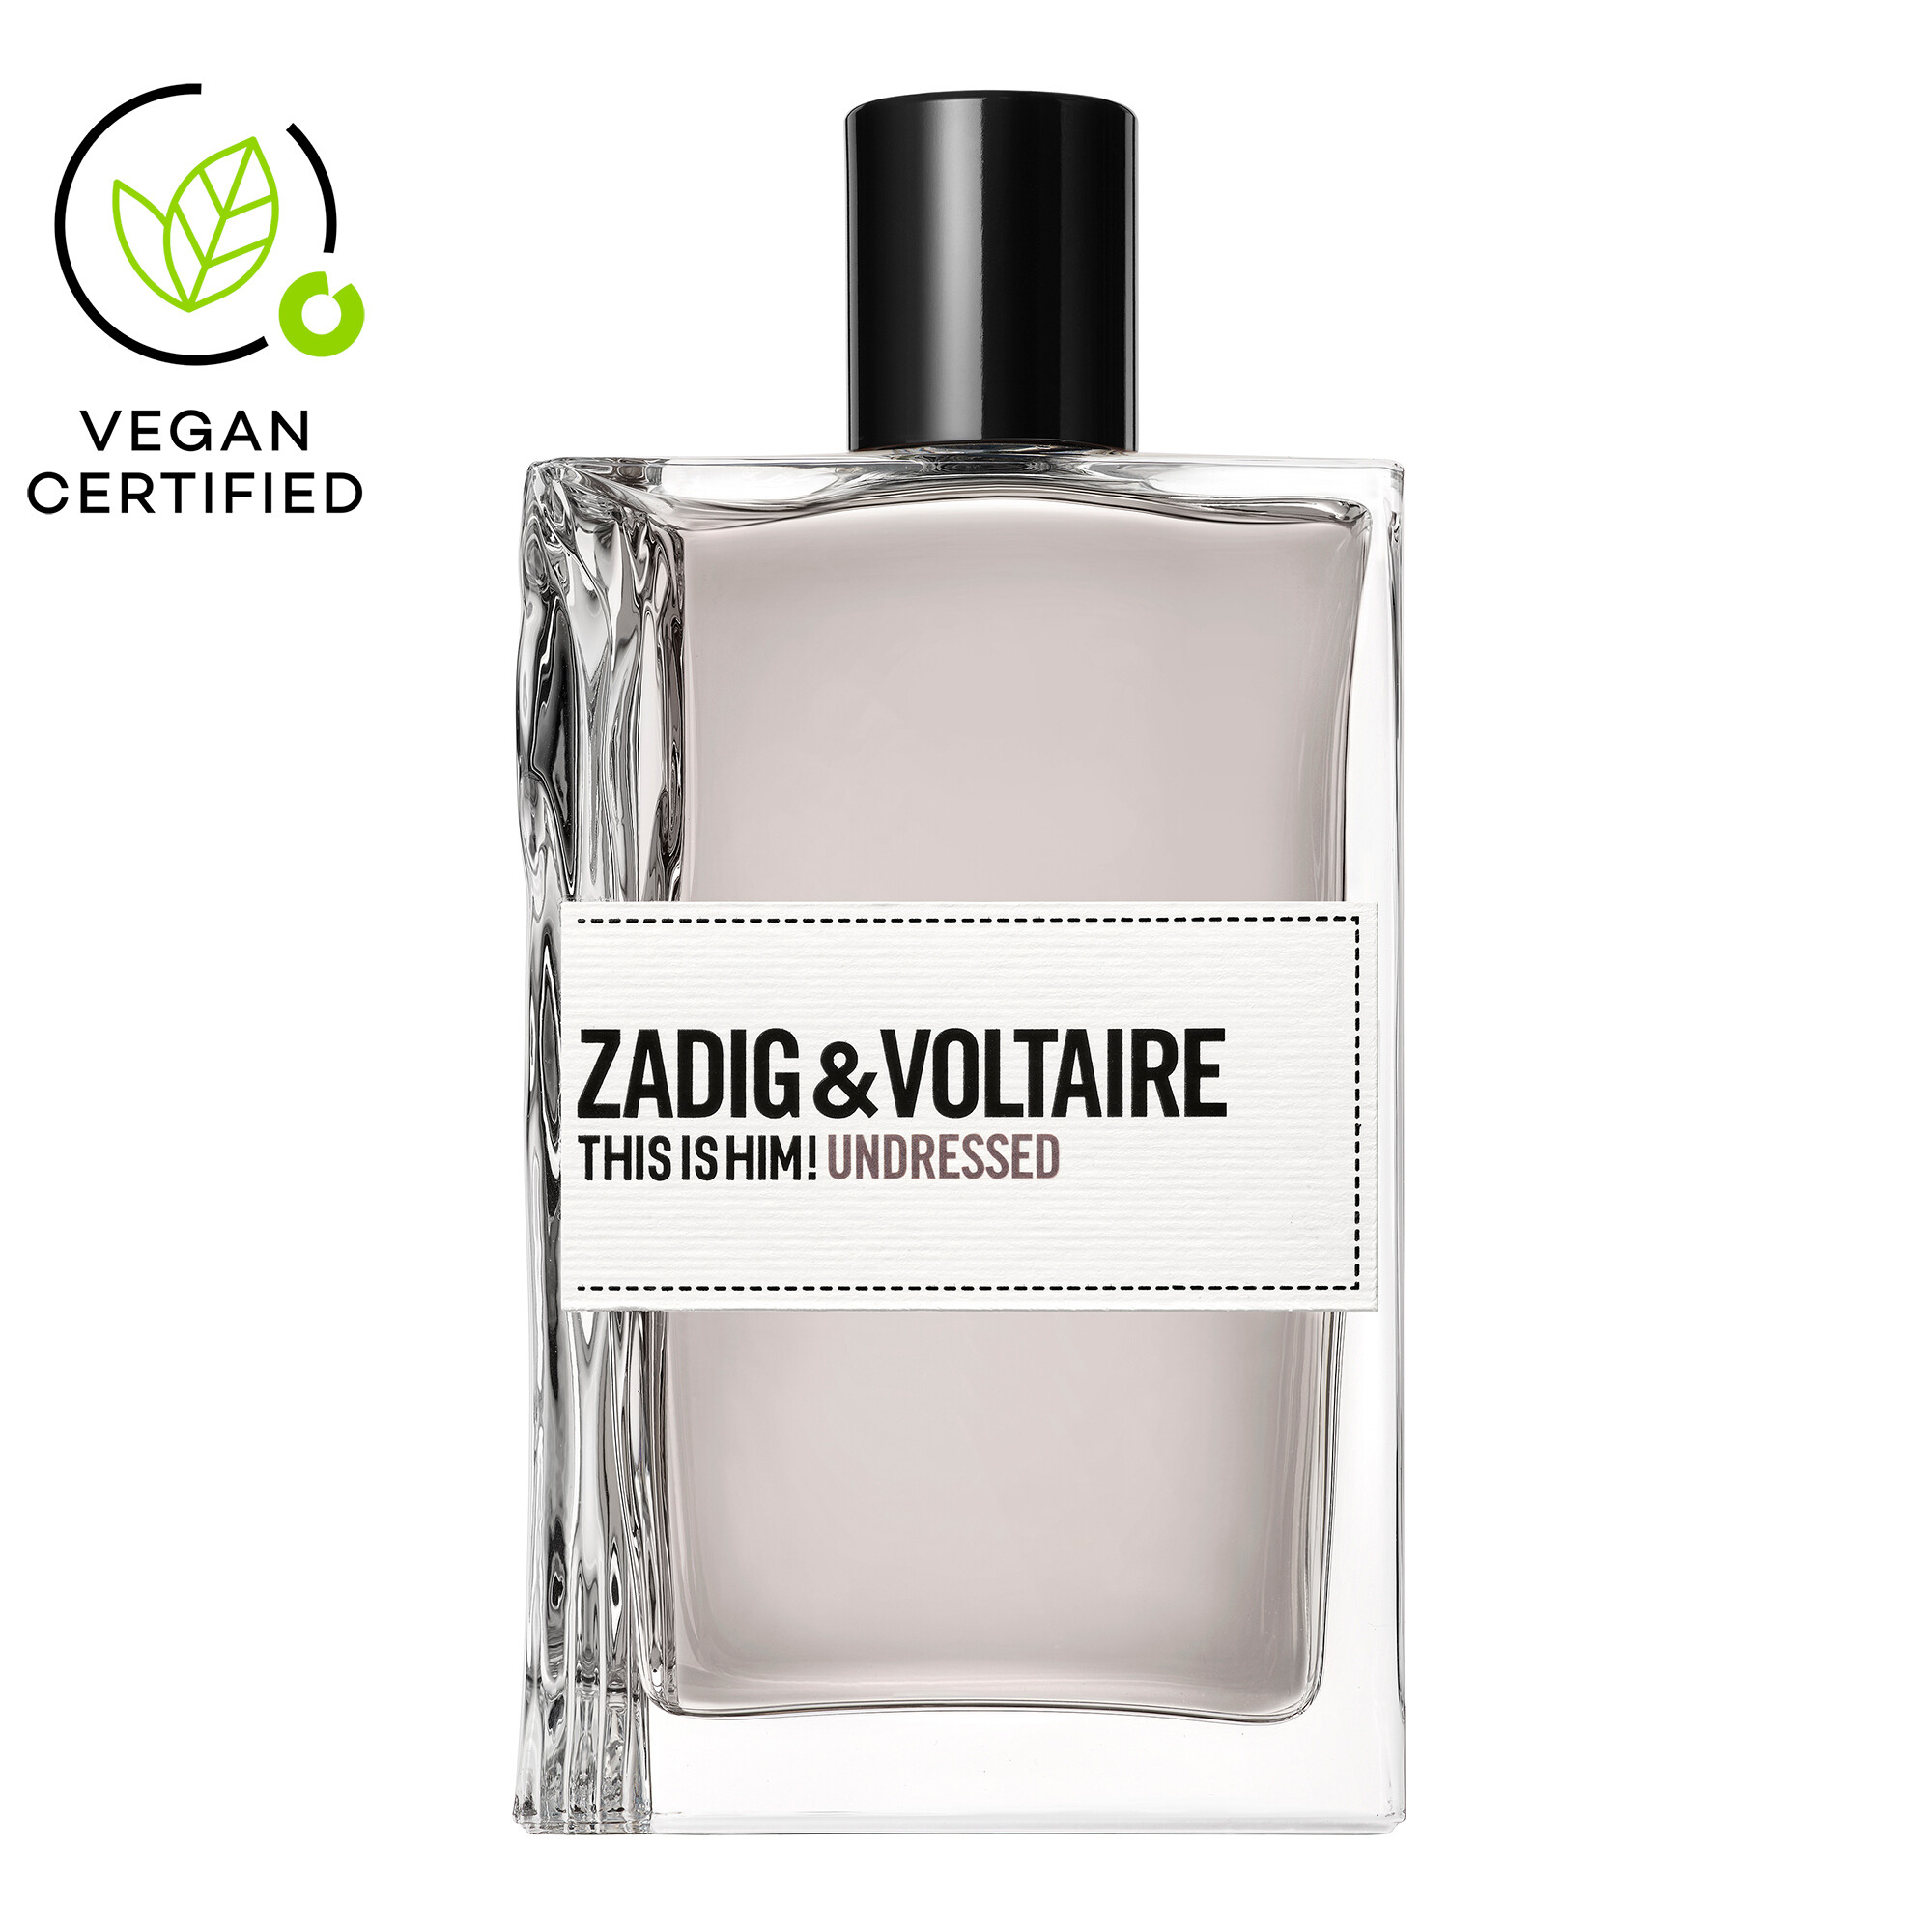 Zadig & Voltaire This is Him! Undressed EDT 100ml